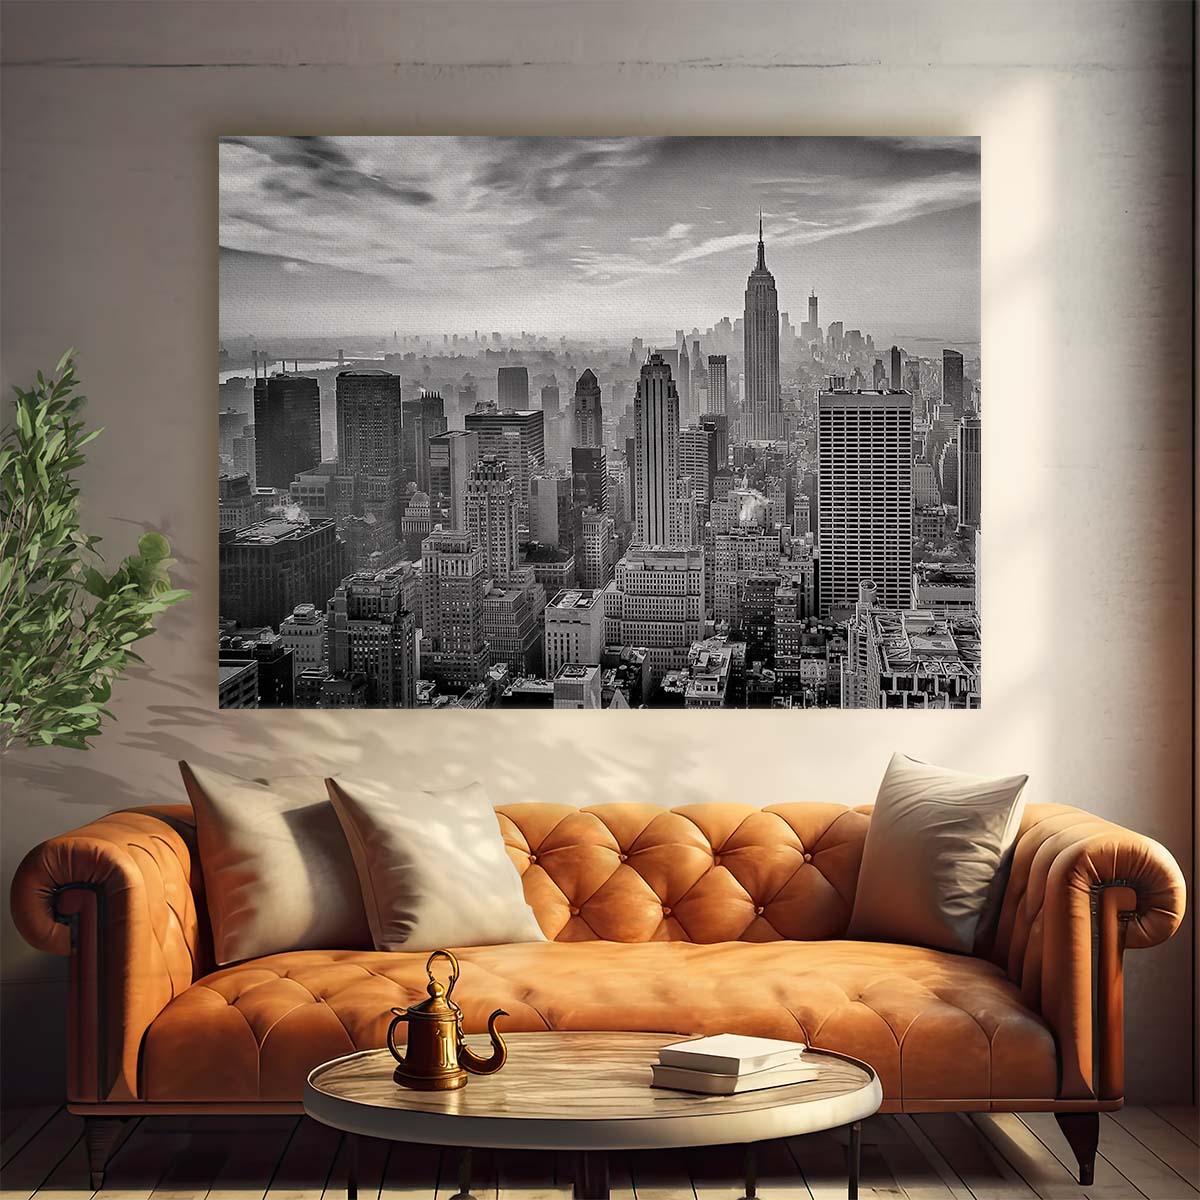 NYC Foggy Skyline Monochrome Cityscape Wall Art by Luxuriance Designs. Made in USA.